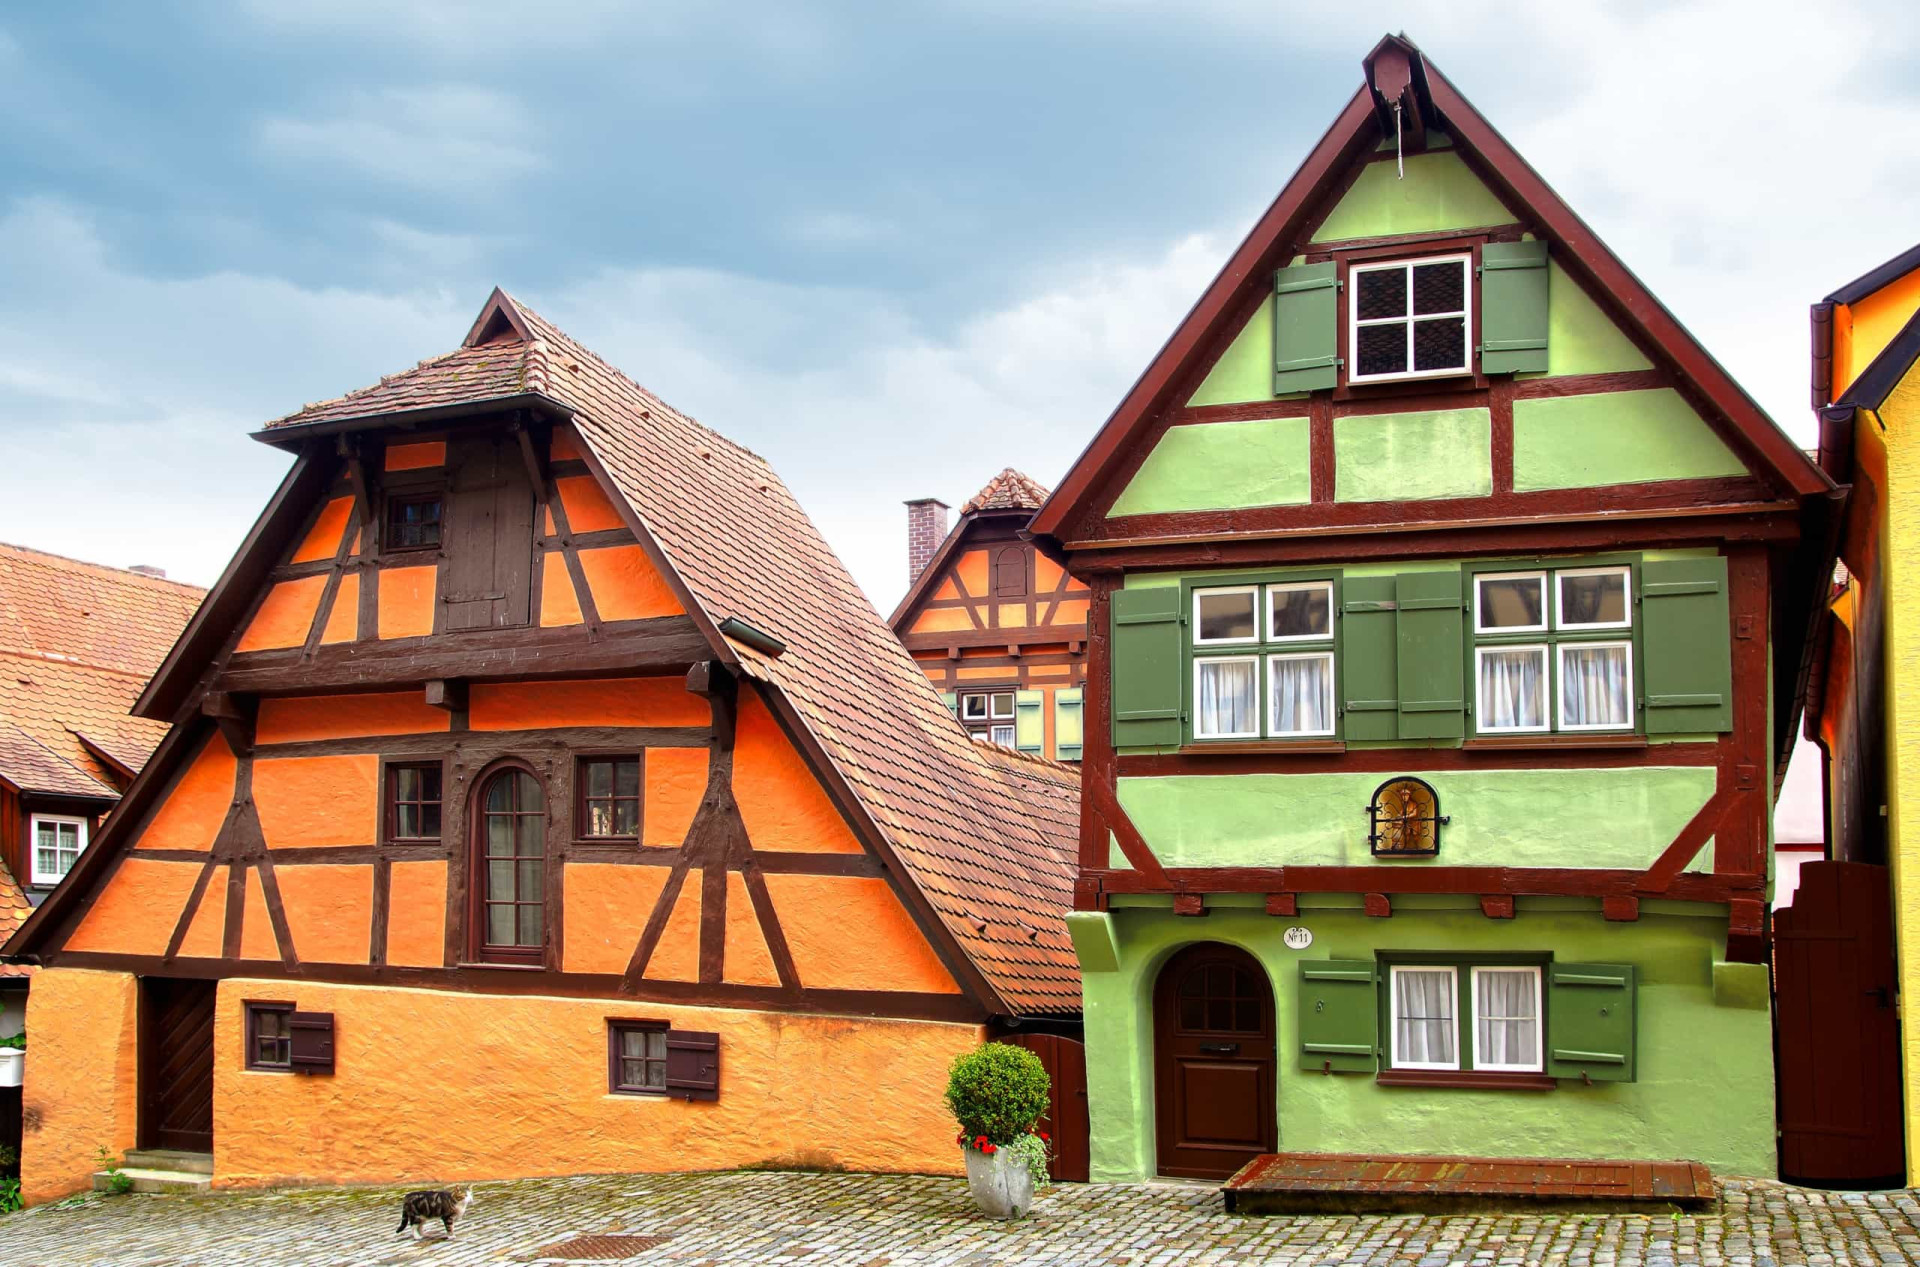 <p>Dinkelsbühl's famous old timber-framed houses are clustered in the old town, itself surrounded by medieval walls and towers. Much of the destination dates back to the 15th to early 17th centuries.</p><p><a href="https://www.msn.com/en-us/community/channel/vid-7xx8mnucu55yw63we9va2gwr7uihbxwc68fxqp25x6tg4ftibpra?cvid=94631541bc0f4f89bfd59158d696ad7e">Follow us and access great exclusive content every day</a></p>